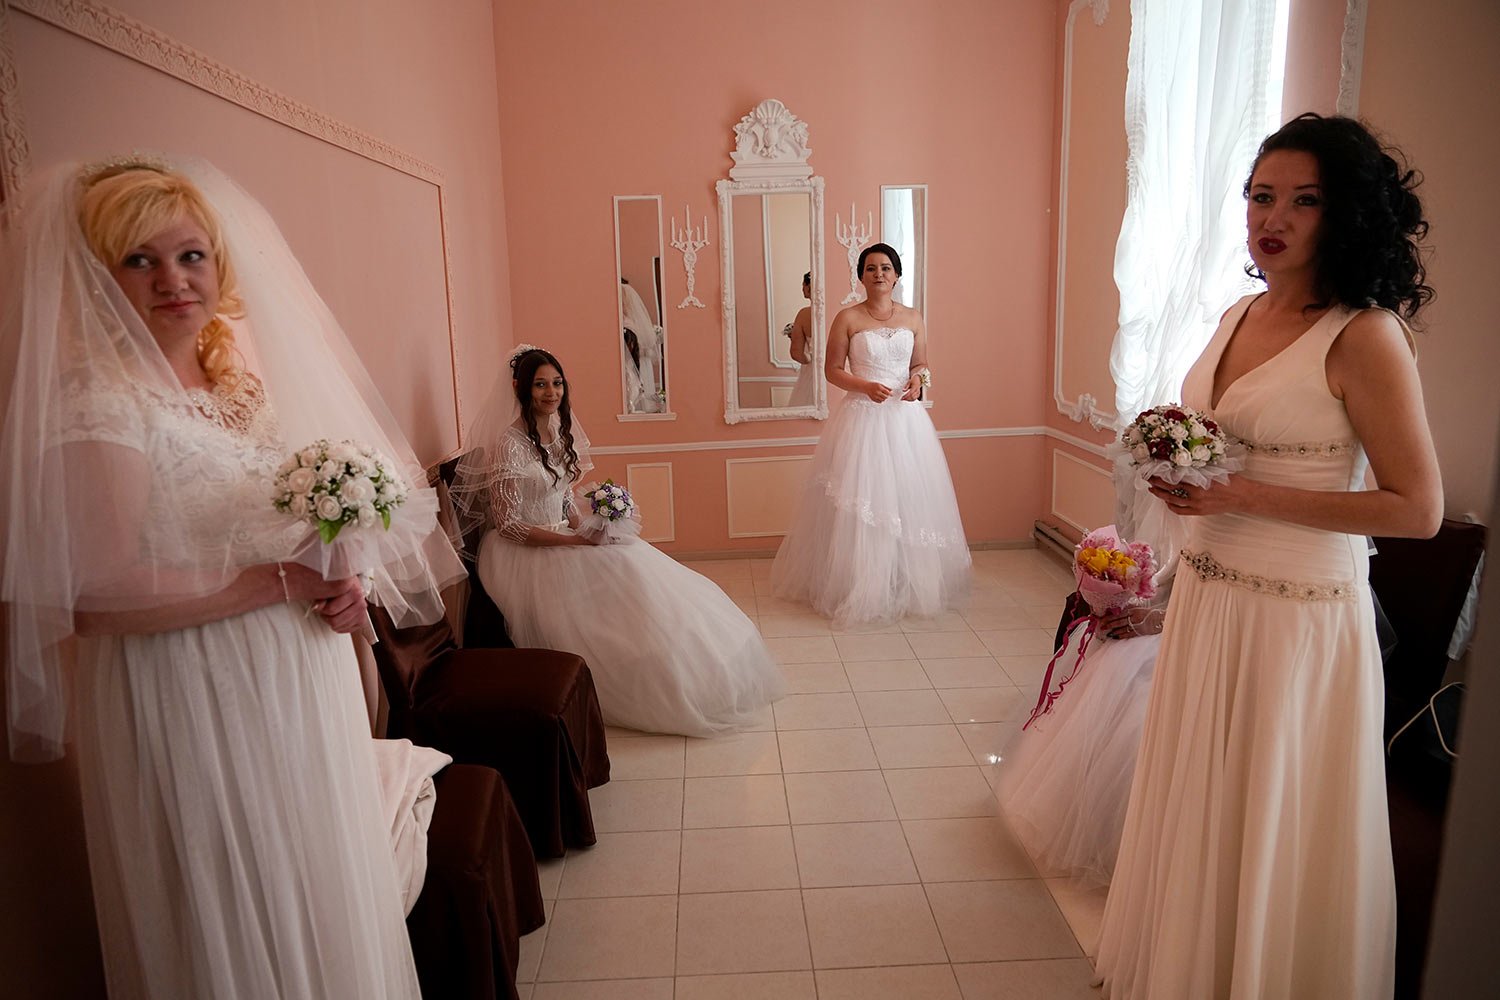  Brides wait to attend a wedding ceremony of several pairs in the center of Berdyansk, in territory under the government of the Donetsk People's Republic, eastern Ukraine, Saturday, April 30, 2022. This photo was taken during a trip organized by the 